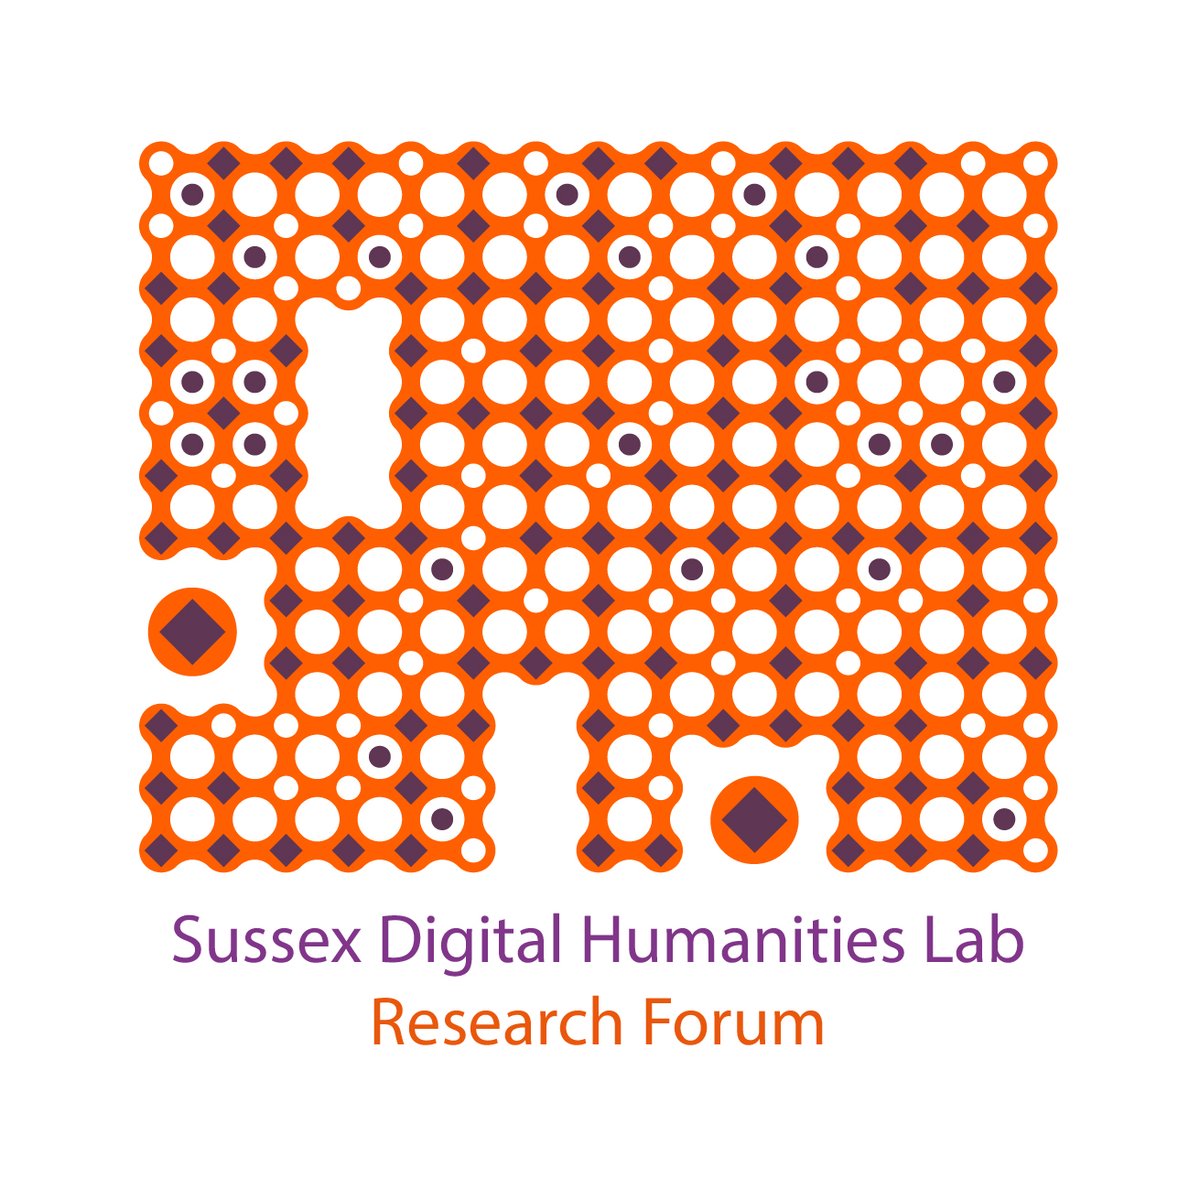 Monday 30 Oct - SHL Research Forum a space for Sussex researchers + res partners to develop research projects & nourishing our research community sussex.ac.uk/research/centr…